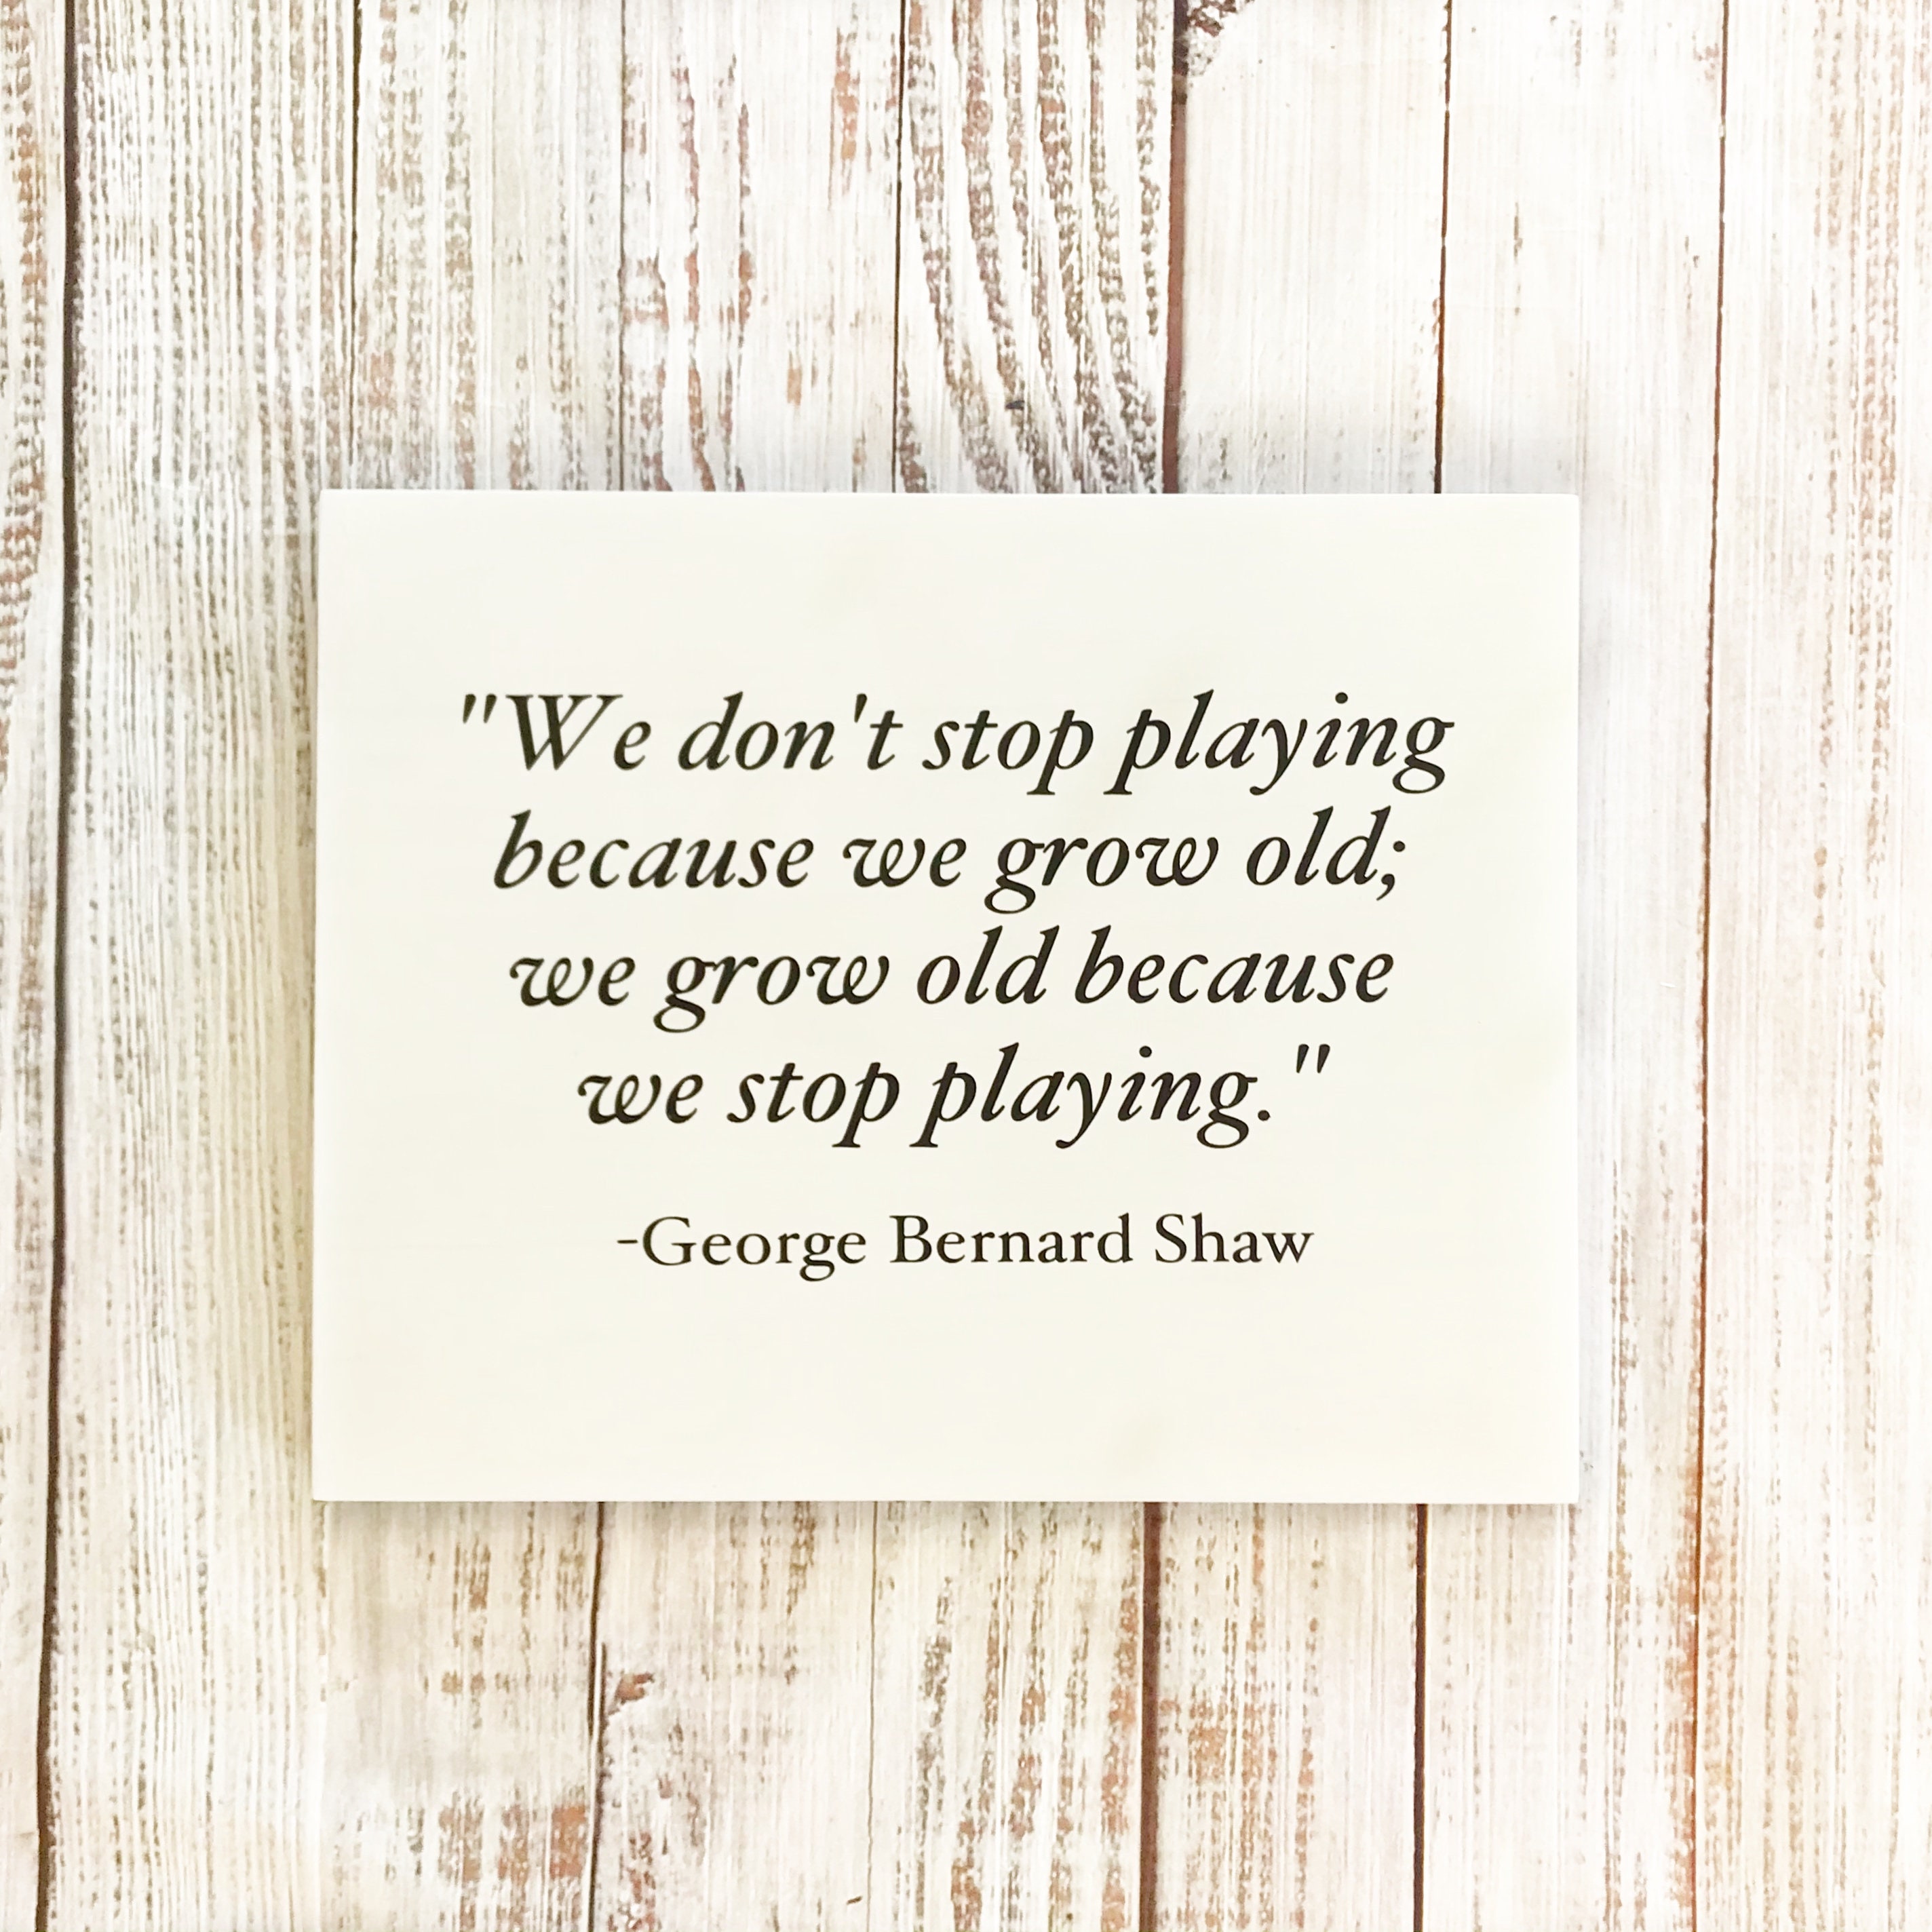 George Bernard Shaw - We don't stop playing because we